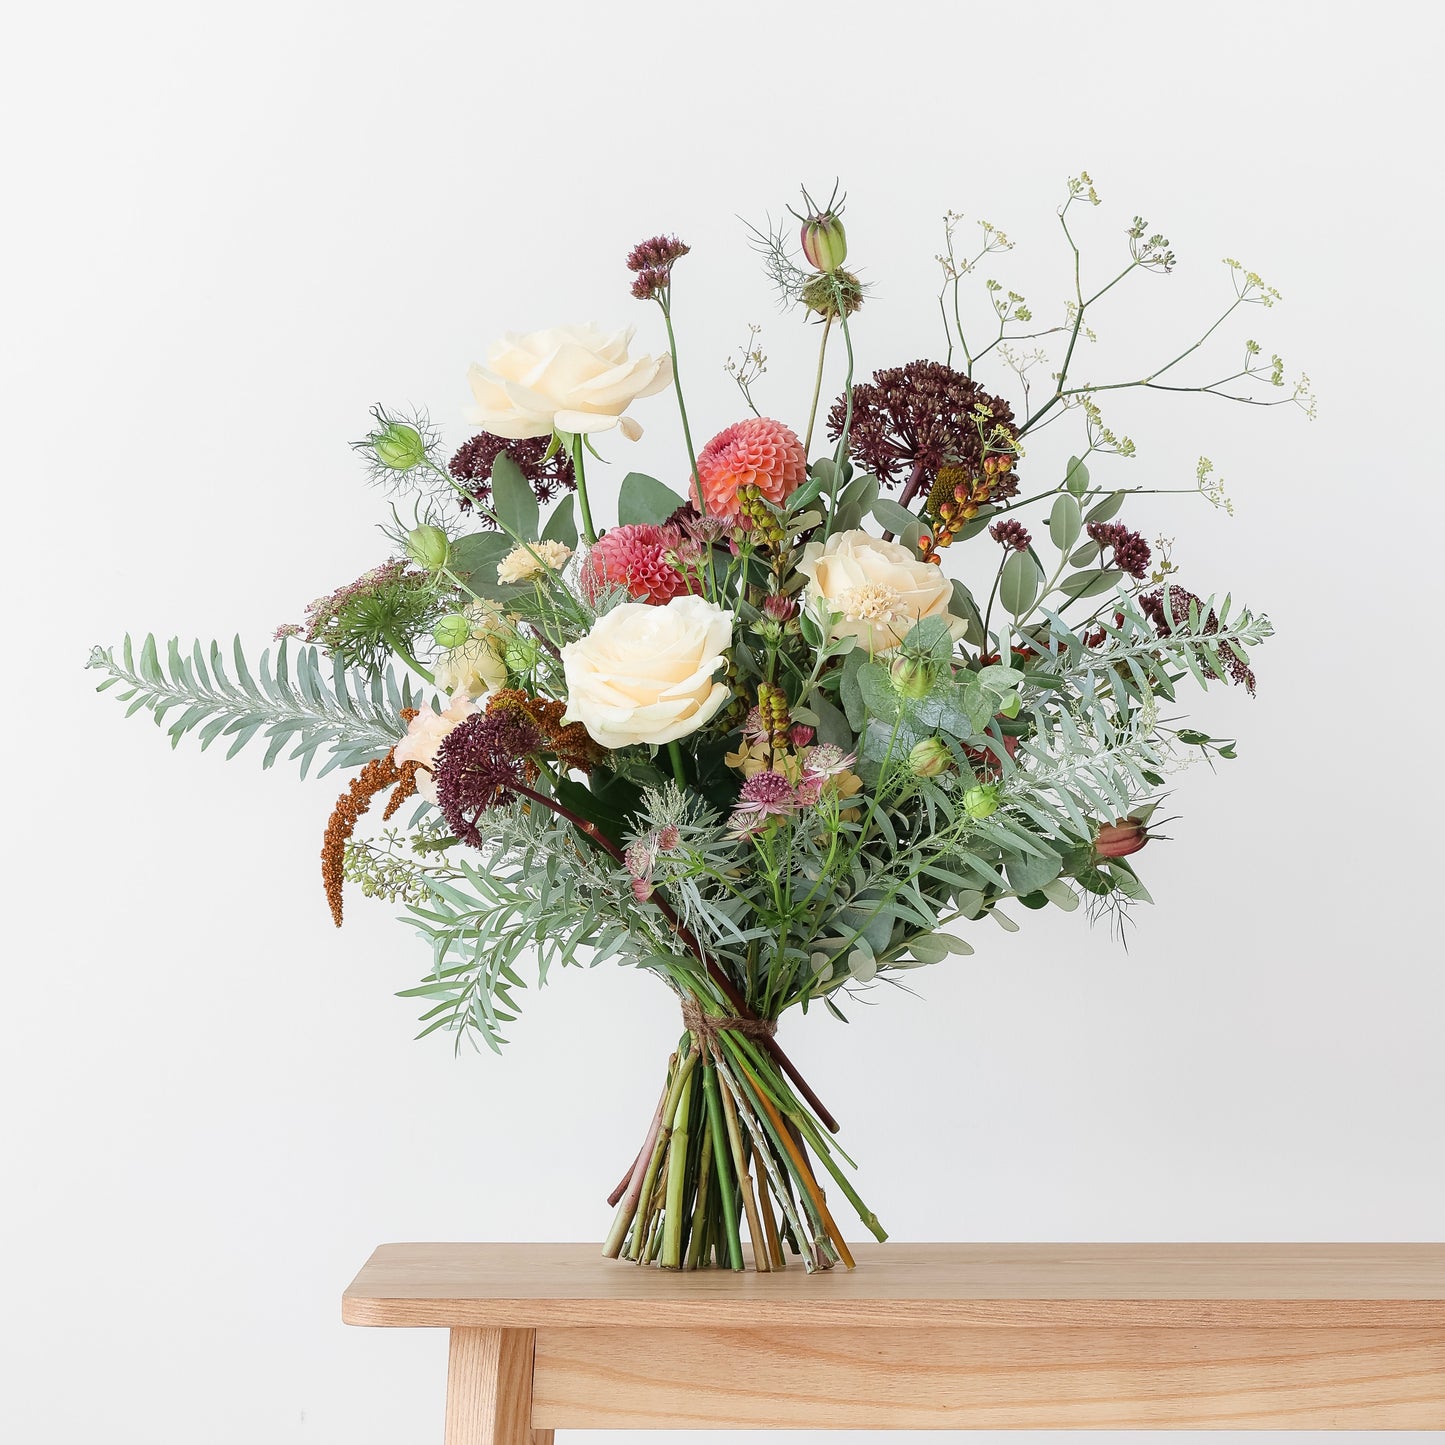 Monthly Flowers Gift Subscription